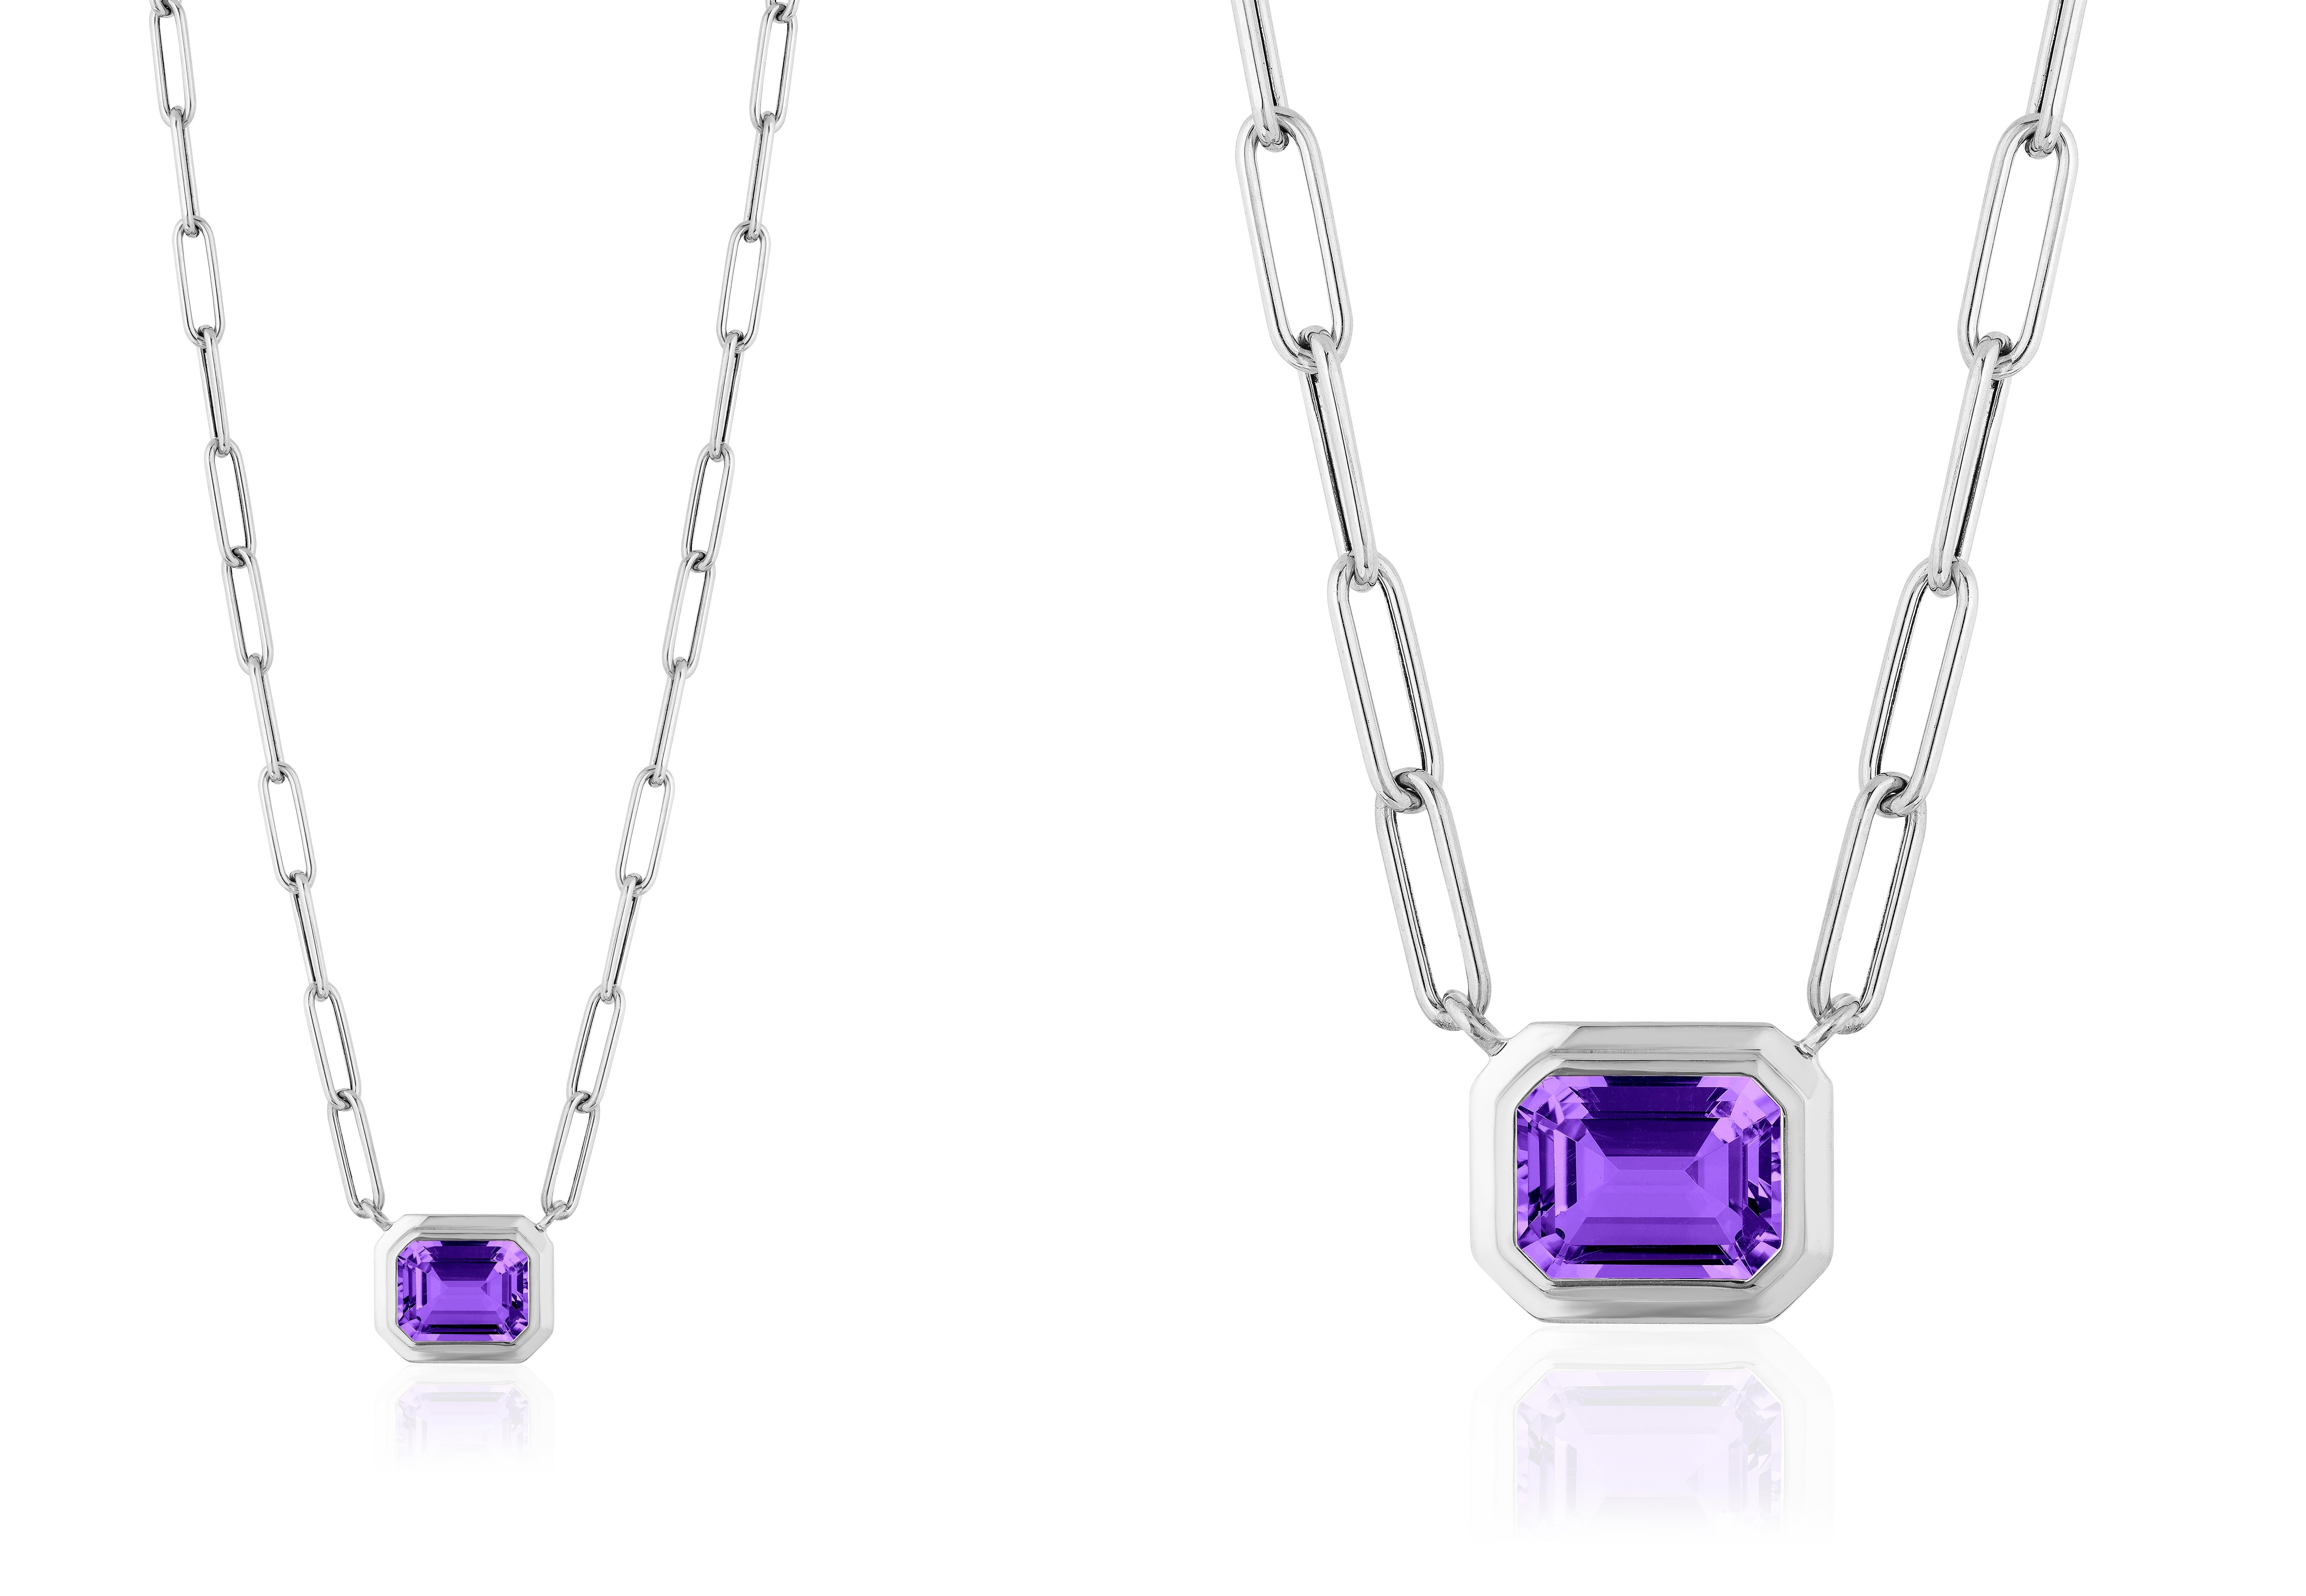 This beautiful East- West Amethyst Emerald Cut Bezel Set Pendant set in 18K White Gold is from our ‘Manhattan’ Collection. Minimalist lines yet bold structures are what our Manhattan Collection is all about. Our pieces represent the famous skyline